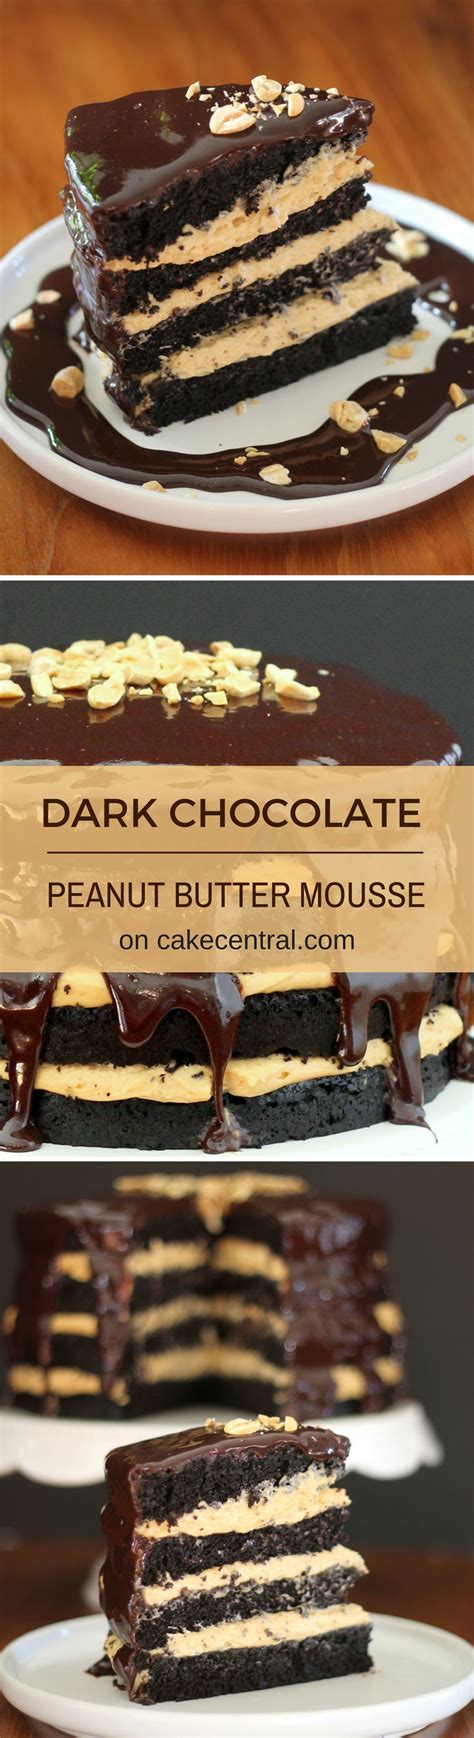 dark-chocolate-cake-with-peanut-butter-mousse image